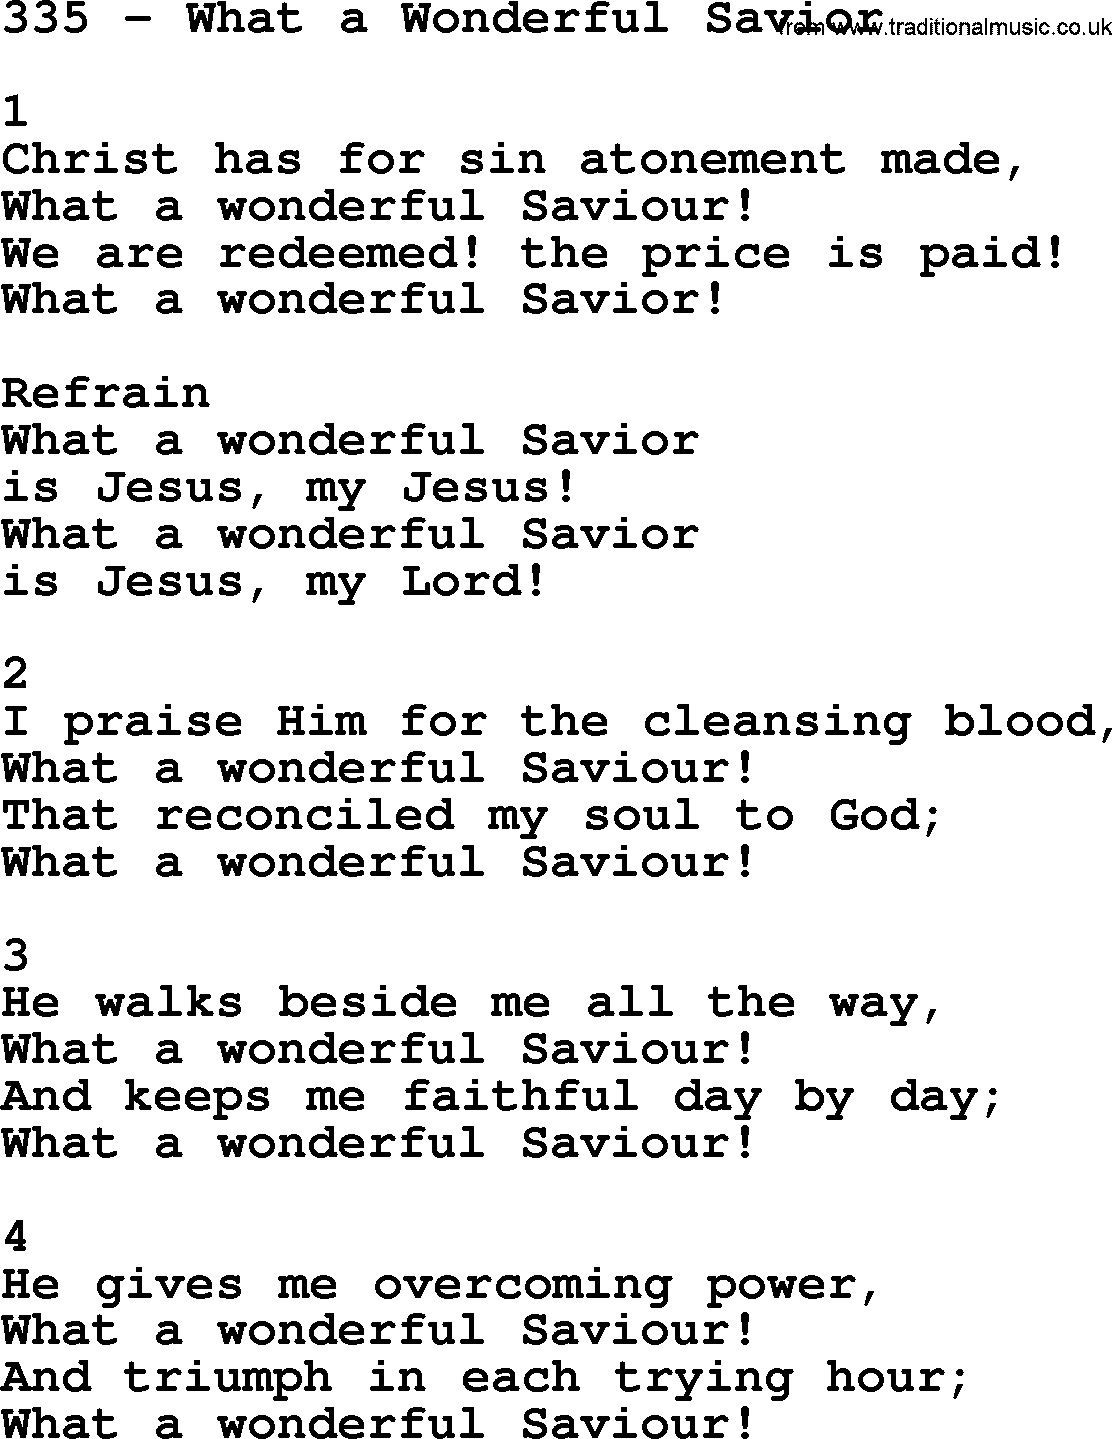 Complete Adventis Hymnal, title: 335-What A Wonderful Savior, with lyrics, midi, mp3, powerpoints(PPT) and PDF,